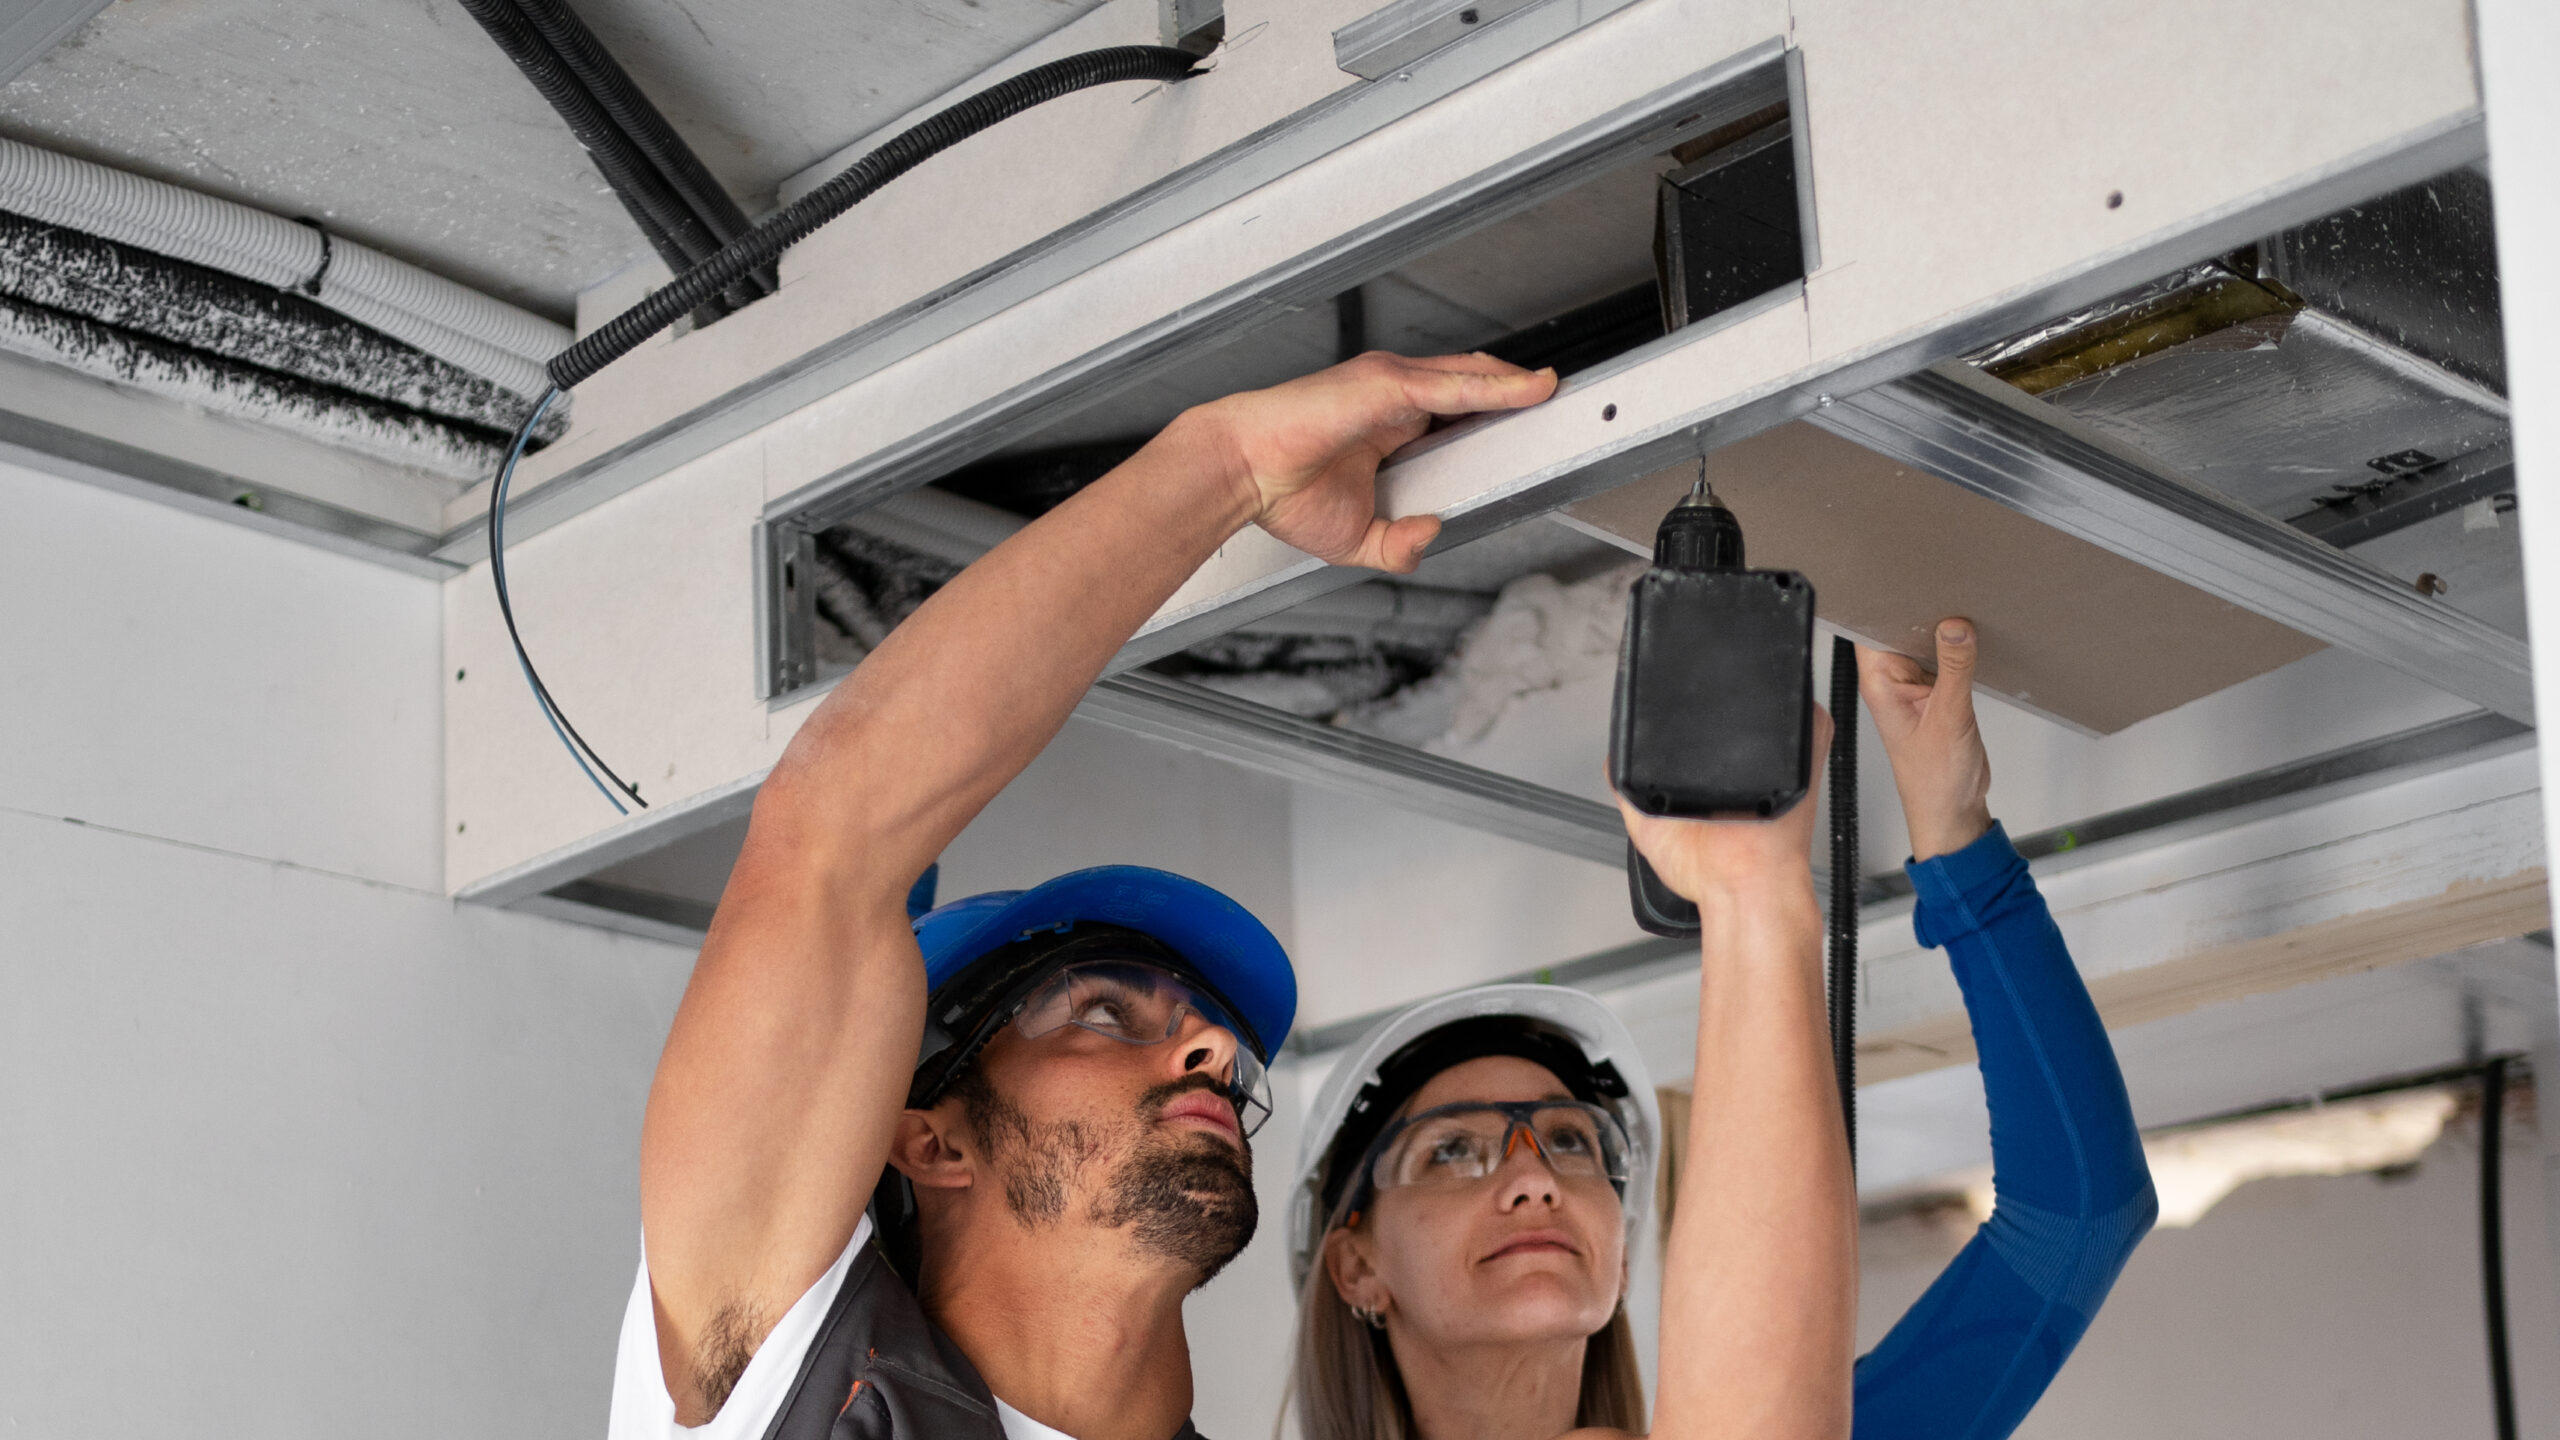 The Complete Guide to HVAC Systems for Rental Homes